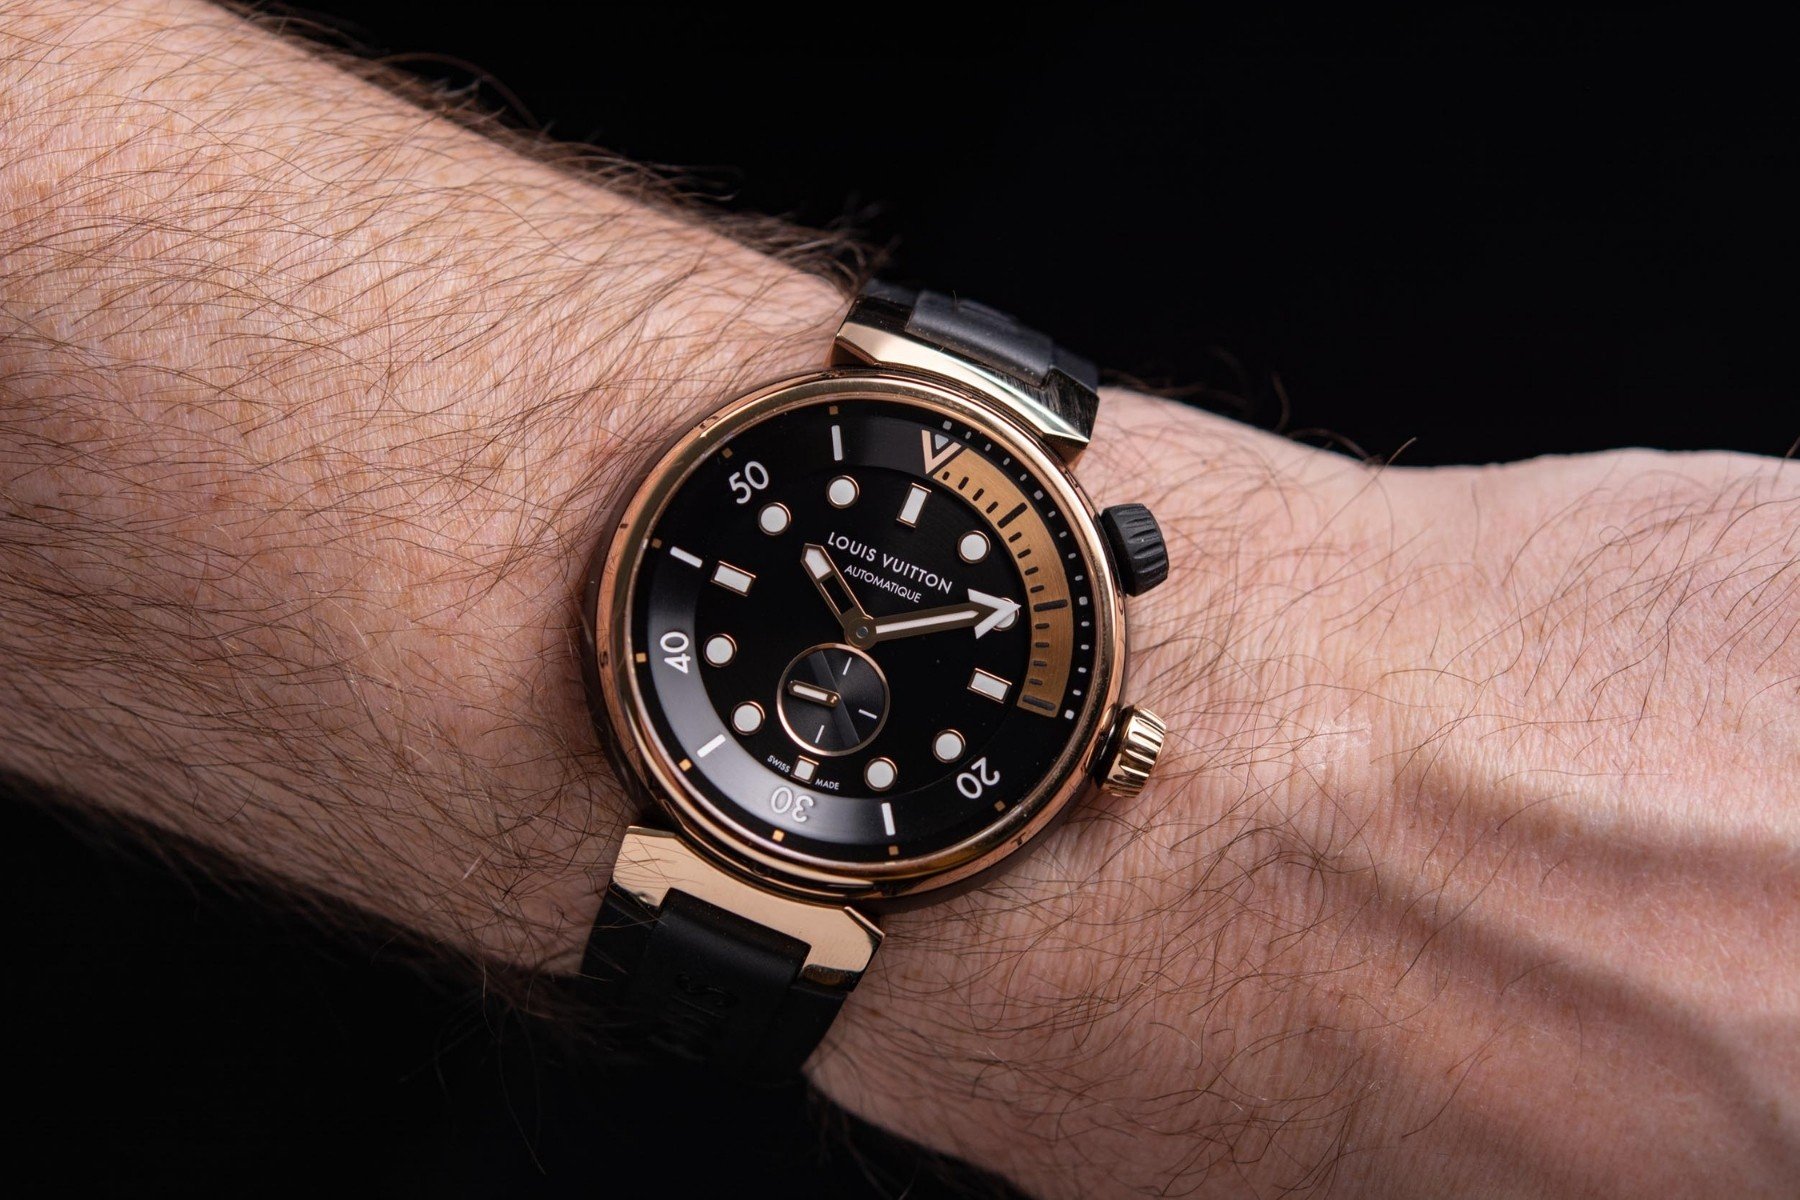 Louis Vuitton's Tambour Street Diver Watch Review, Price, and Where to Buy